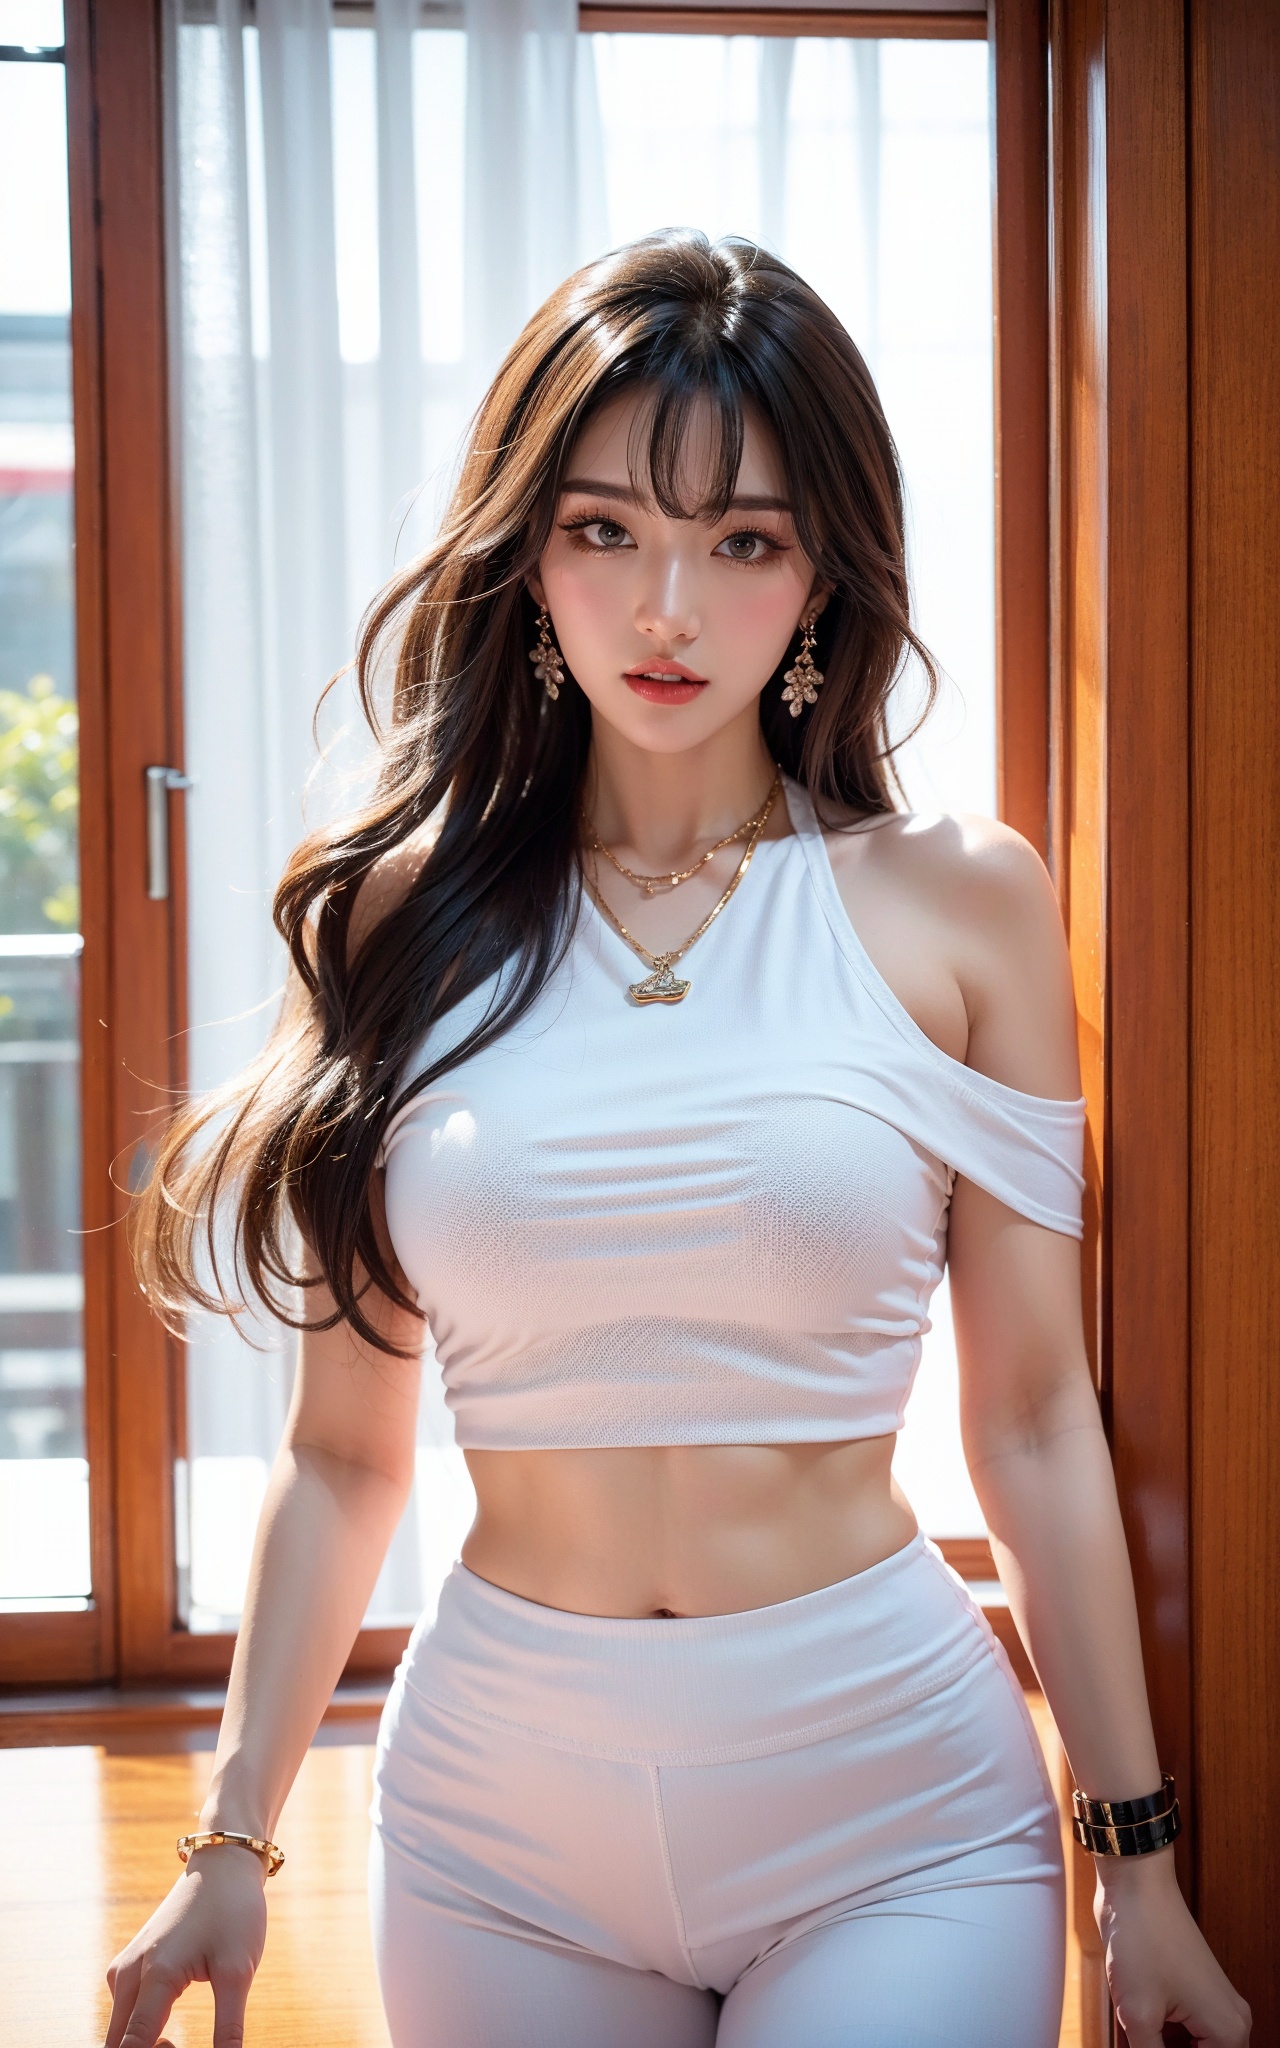  Canon RF85mm f/1.2,masterpiece,best quality,ultra highres,vc,realistic,yoyo,1 girl,(White translucent yoga pants)(korean mixed,kpop idol:1.2),solo,white_shiny_skin,black eyes,necklace,brown_long_wavy_hair,red_shiny_lips,eyelashes,bangs,aface,make-up,shiny,Pore,skin texture,bracelet,offshoulder,see-through,big breasts,